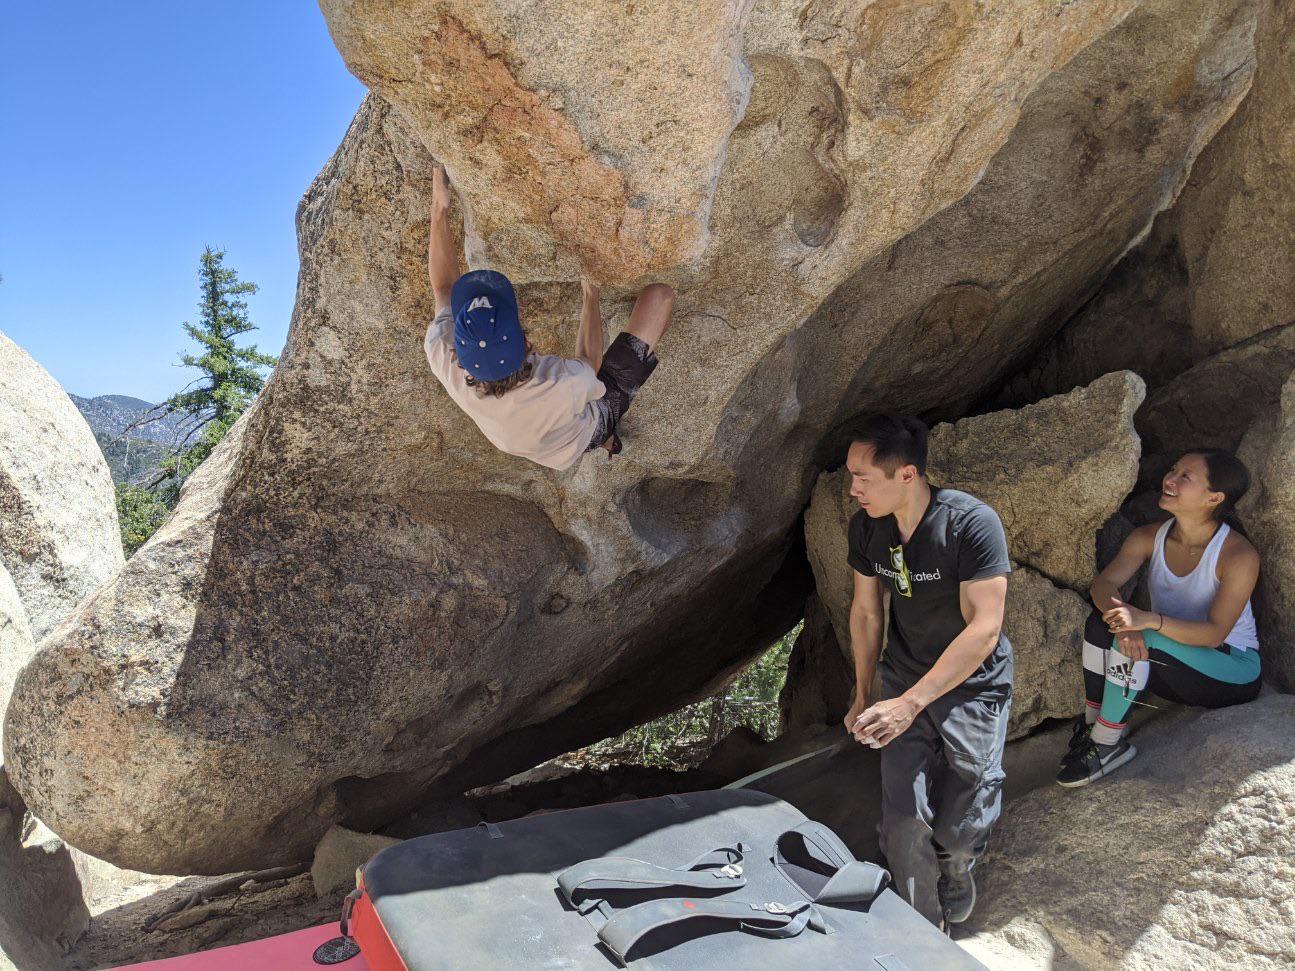 The Fang, Horse Flats, CA - shoutout to the very kind people willing to lend their pads!